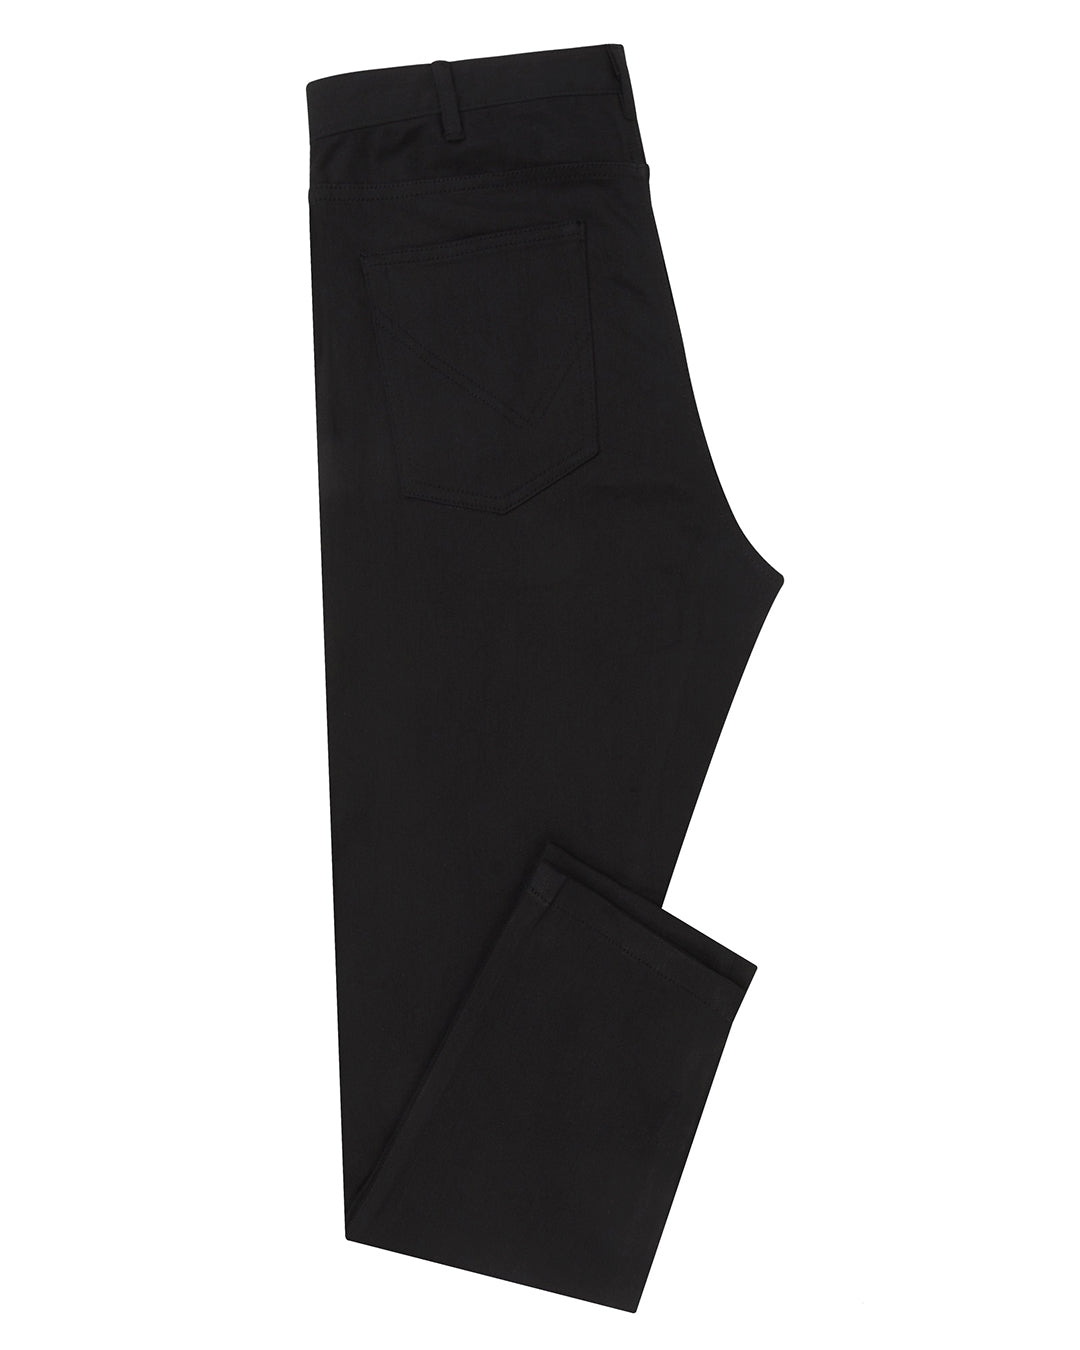 Side view of mens jeans by Luxire in black